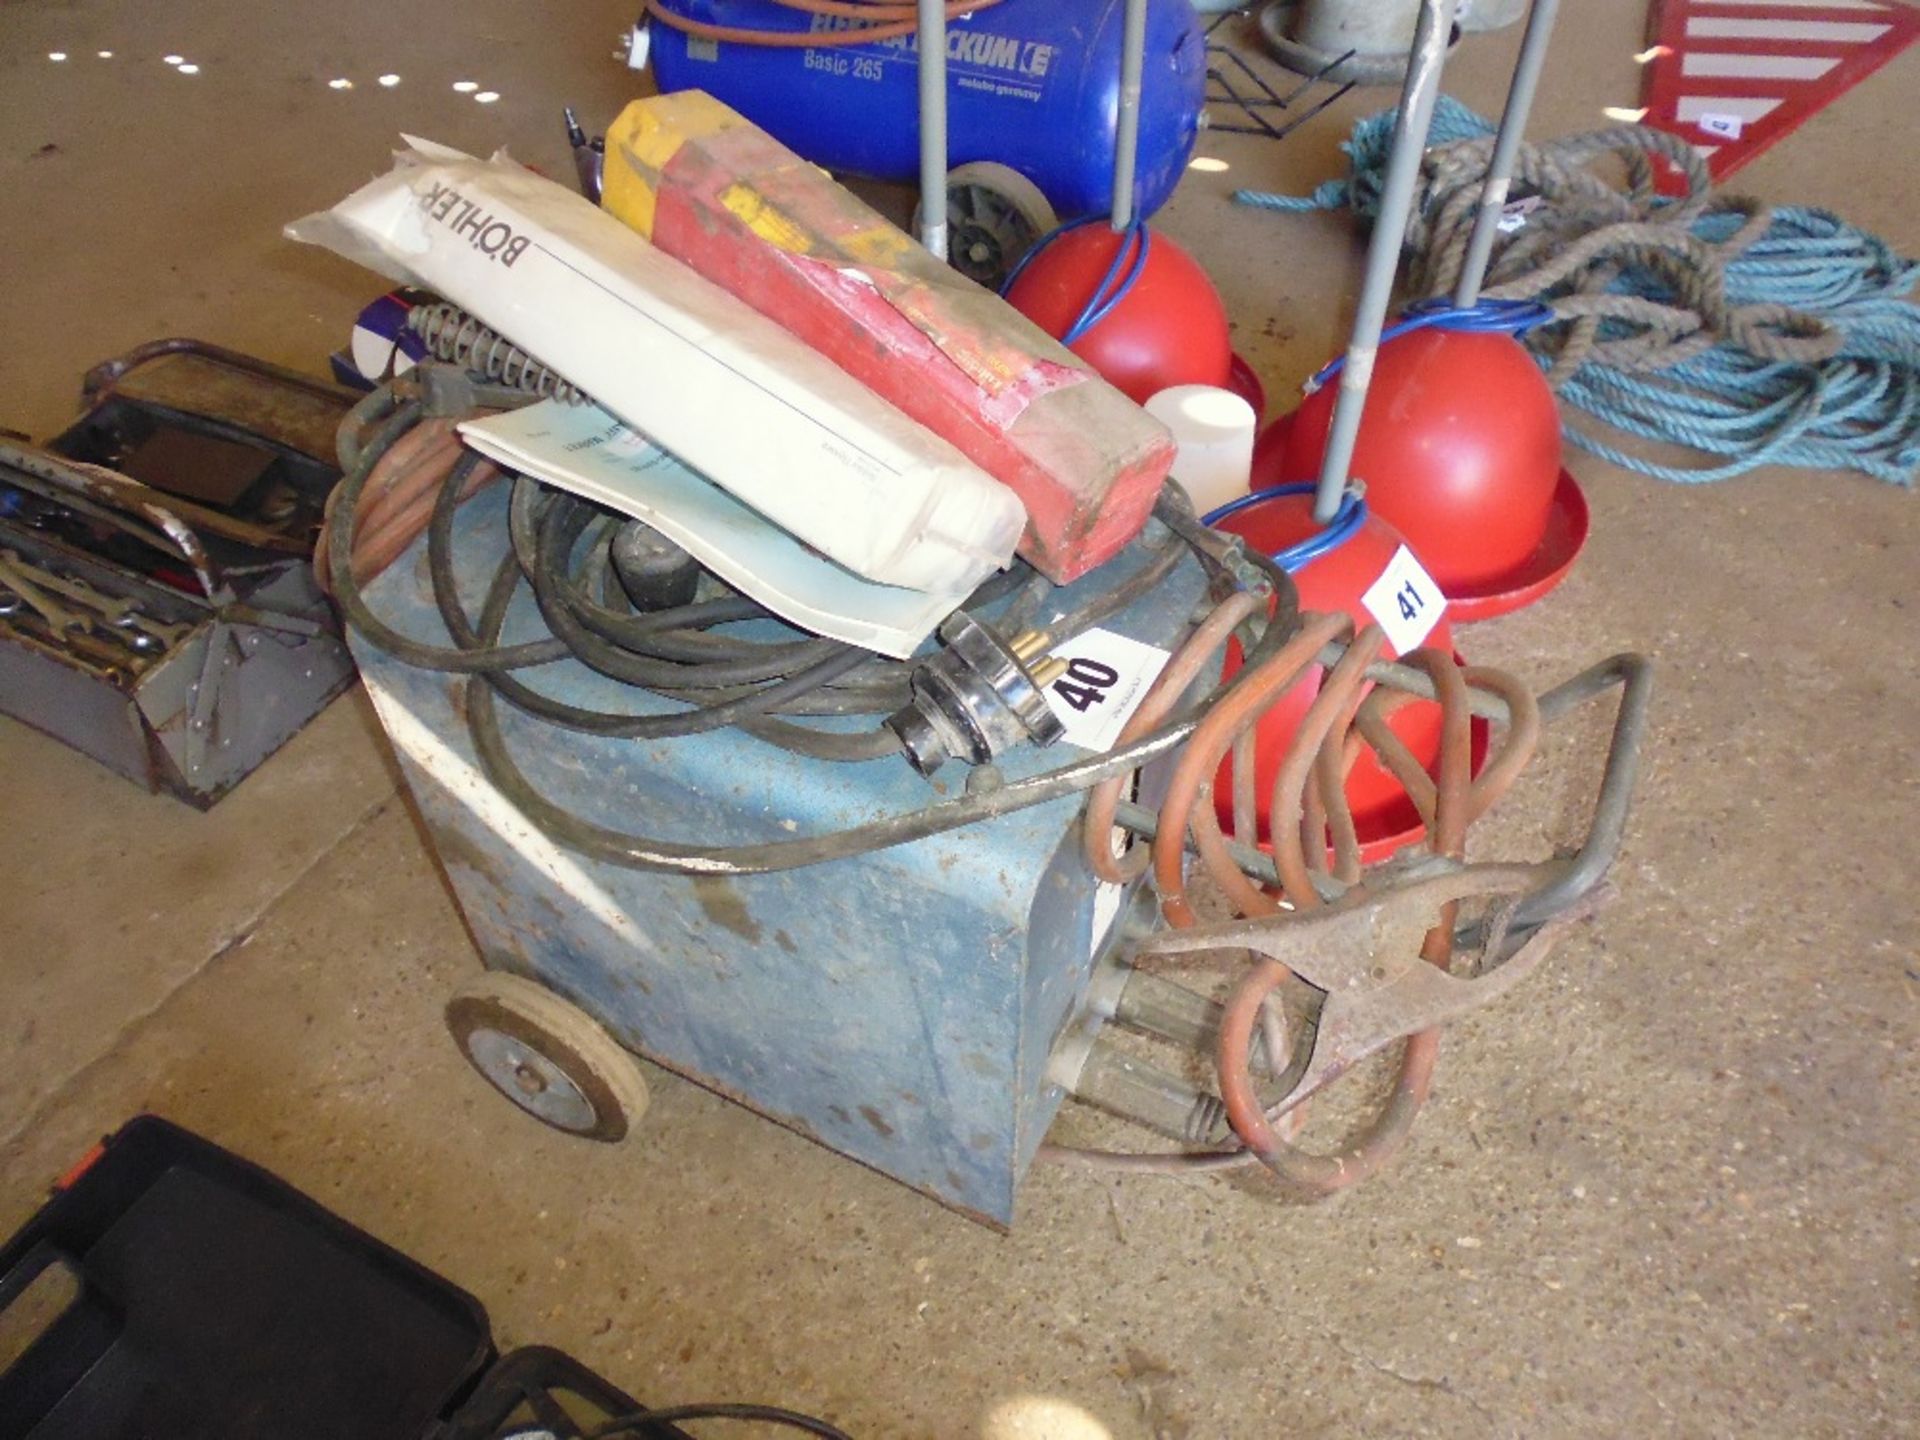 Lyte-Arc welder and a quantity of welding rods.